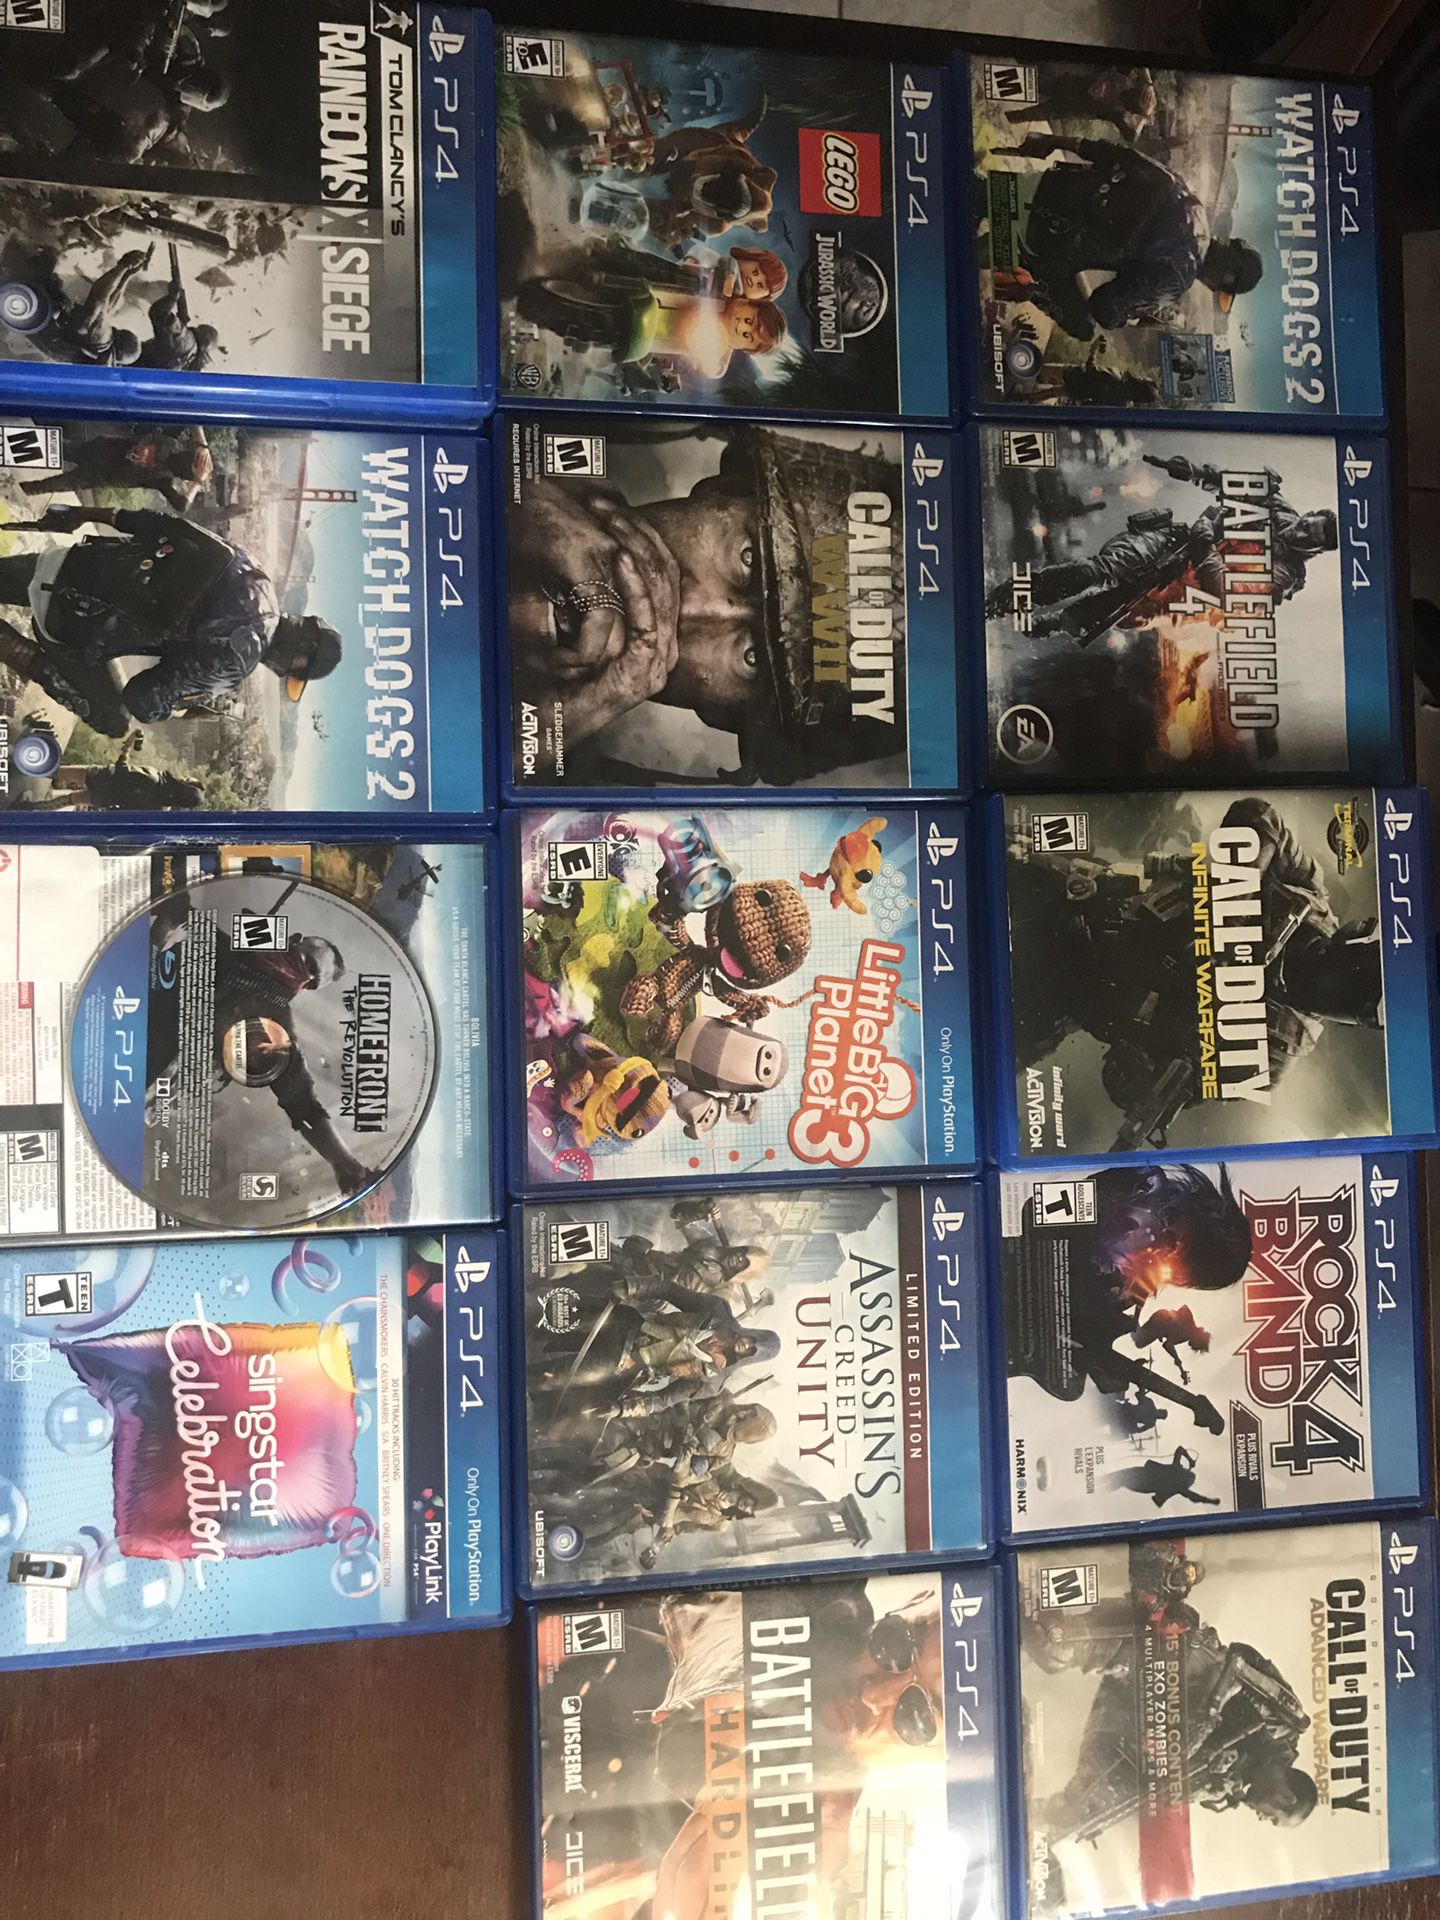 PS4 game with Delivery In some Kissimmee areas included.